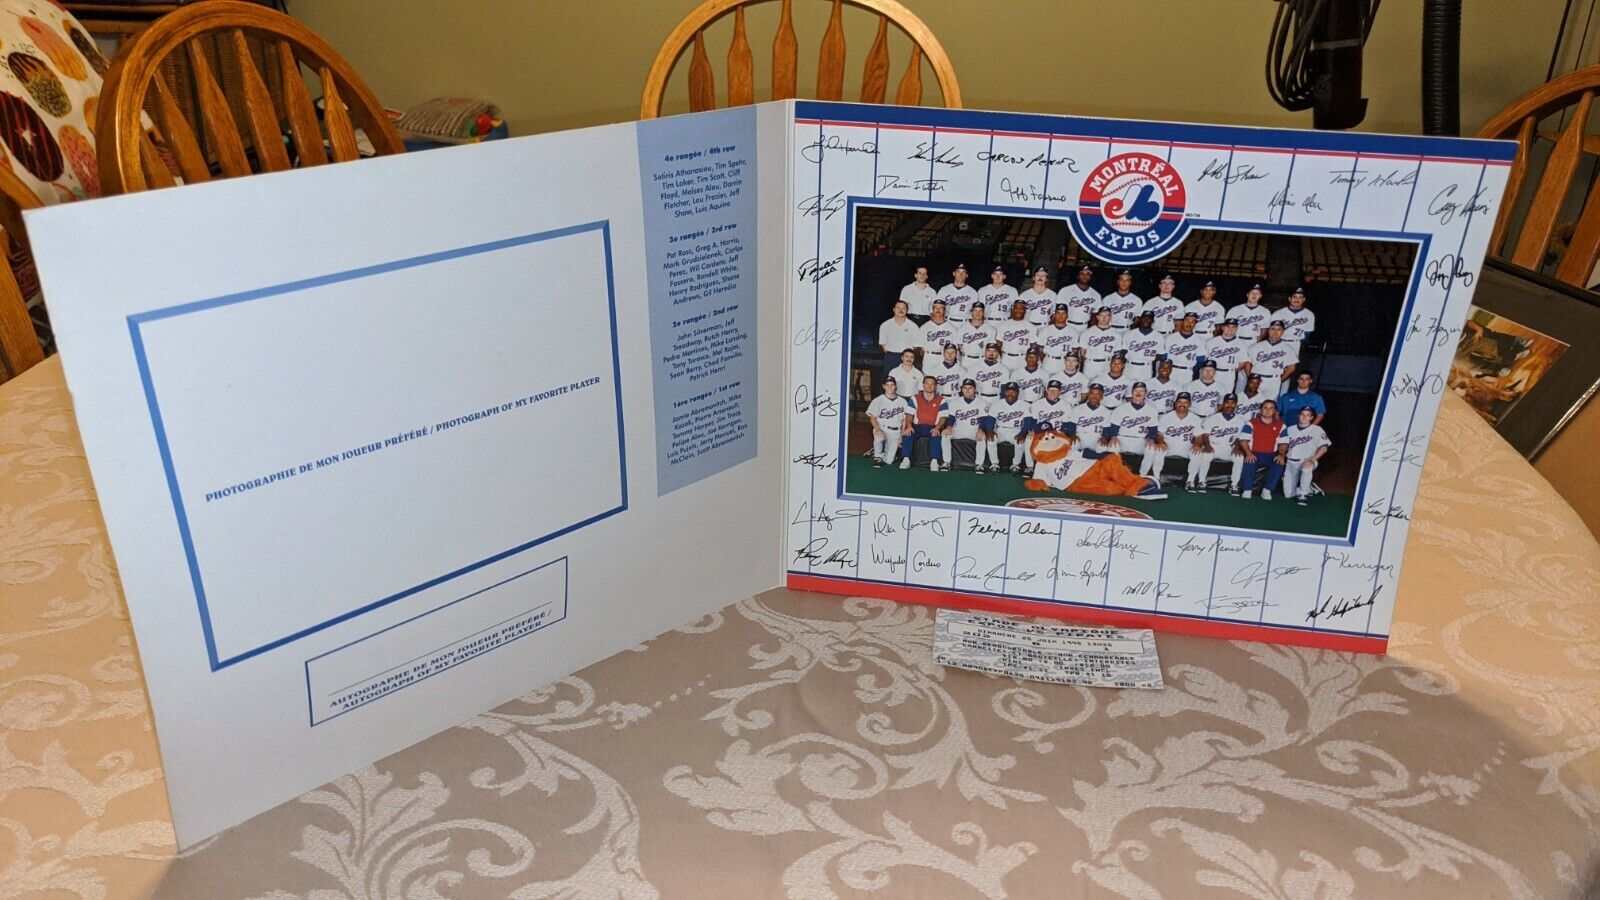 1995 Montreal Expos Camera Day Team Photo Poster painting Display With Pedro Martinez